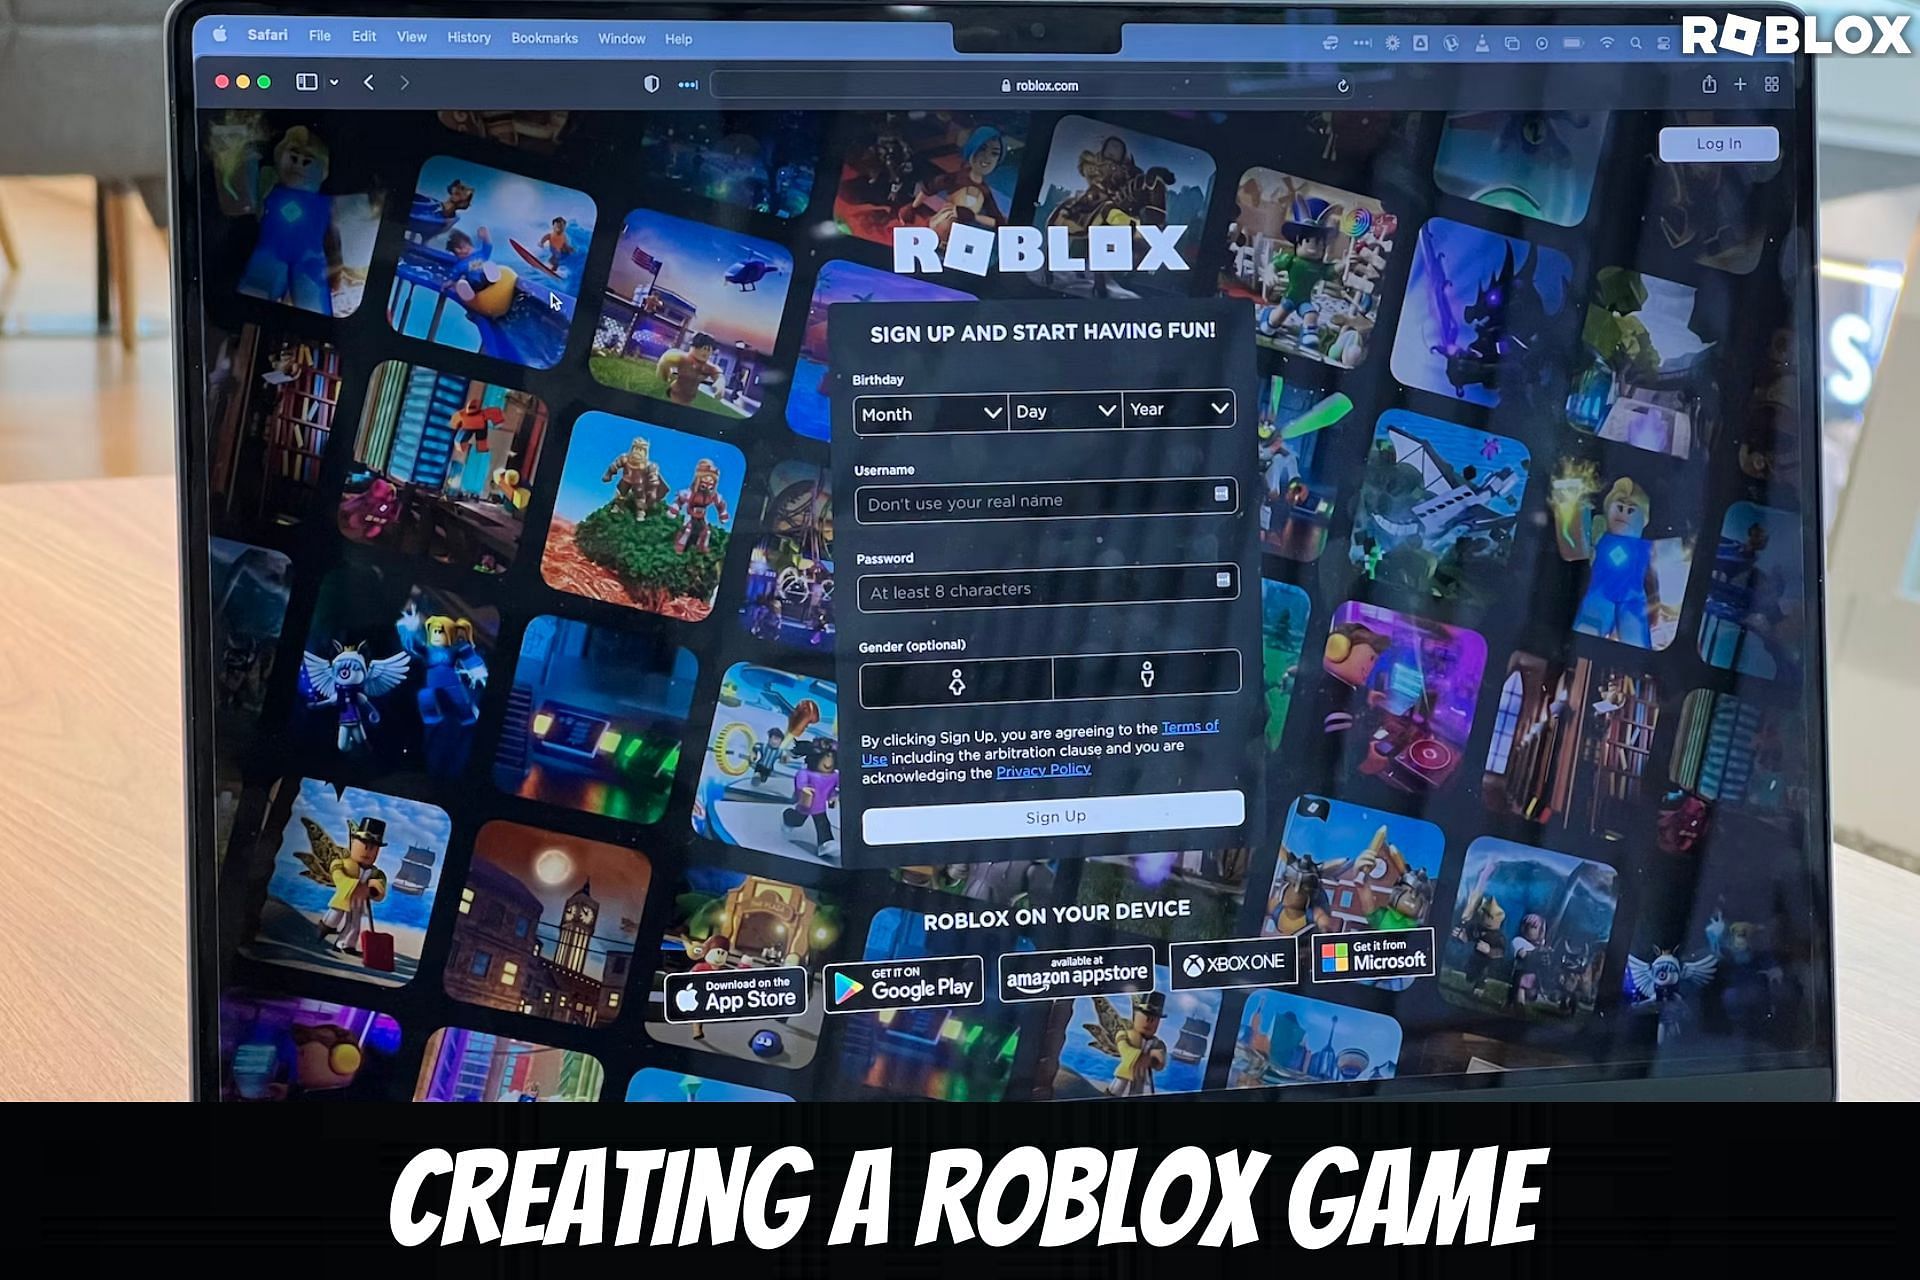 How to Get Roblox Without App Store, Google Play, or Any Other Marketplace